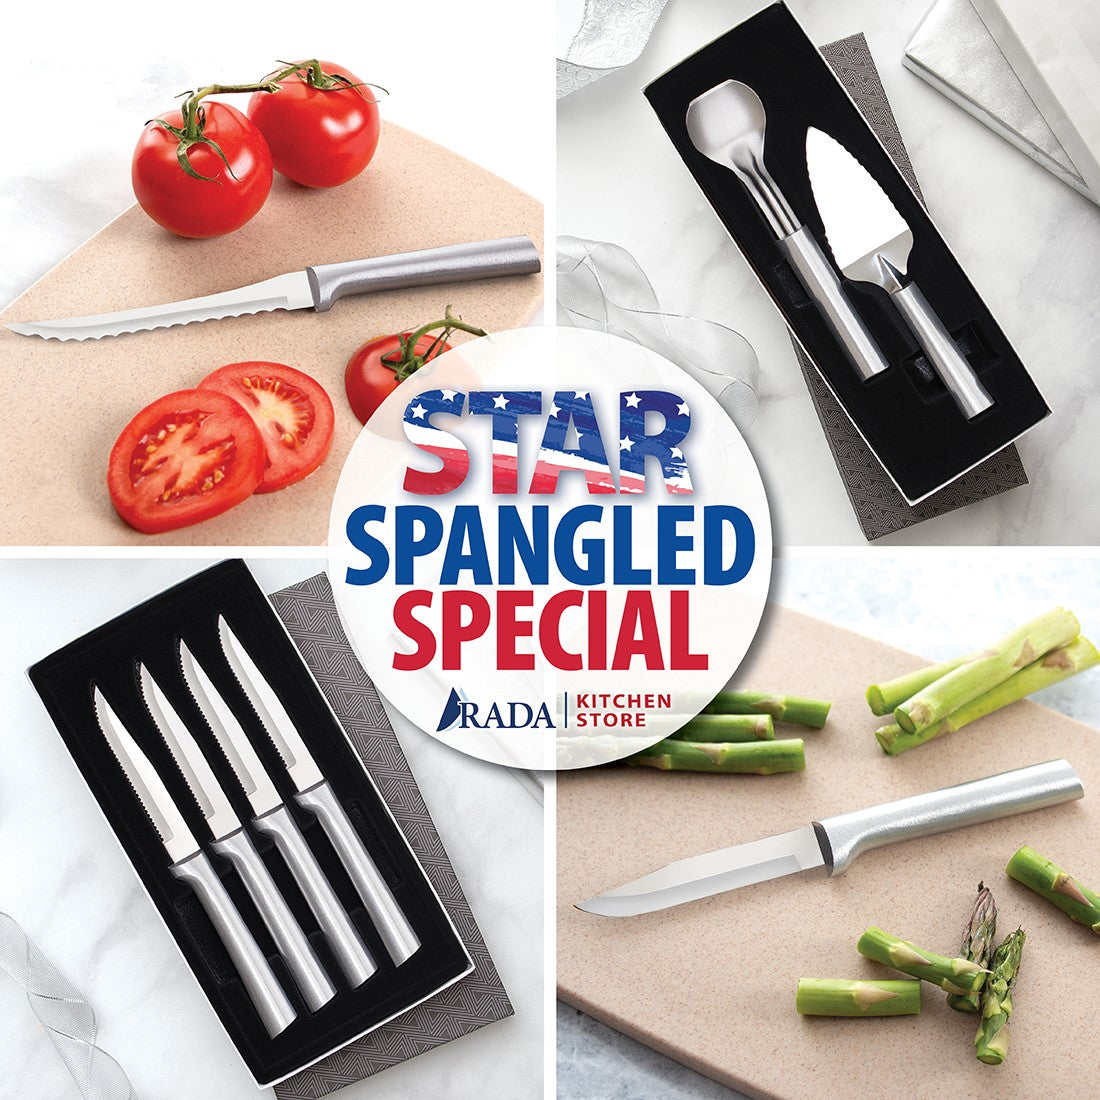 Star Spangled Special comes with a Tomato Slicer, Pie a'la Mode Set, Four Serrated Steak Set, and Regular Paring.